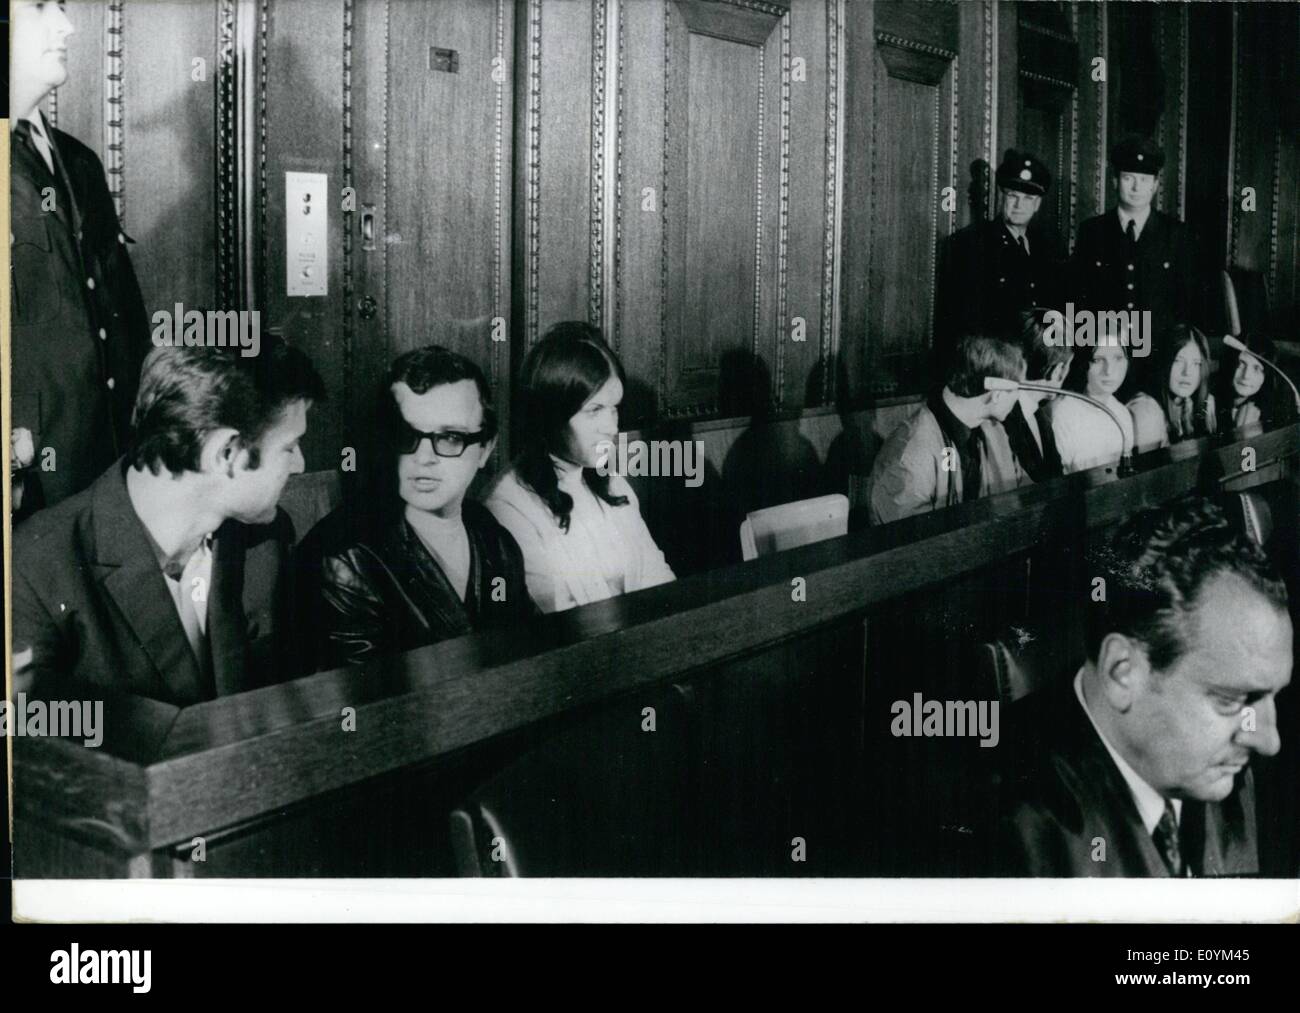 Sep. 09, 1970 - Trial Against The Eight Czechoslovakian Air-plane Hi-Jackers Started In Nuremberg, W. Germany: All the defendants are young people between 19 and 25 years of age. They are three married couples and one engaged couple. Since September 10th, 1970 they have to justify themselves before court at Nuremberg. The offences the Director of Public Prosecutions is accusing them of are deprivation of liberty and intimidation Stock Photo